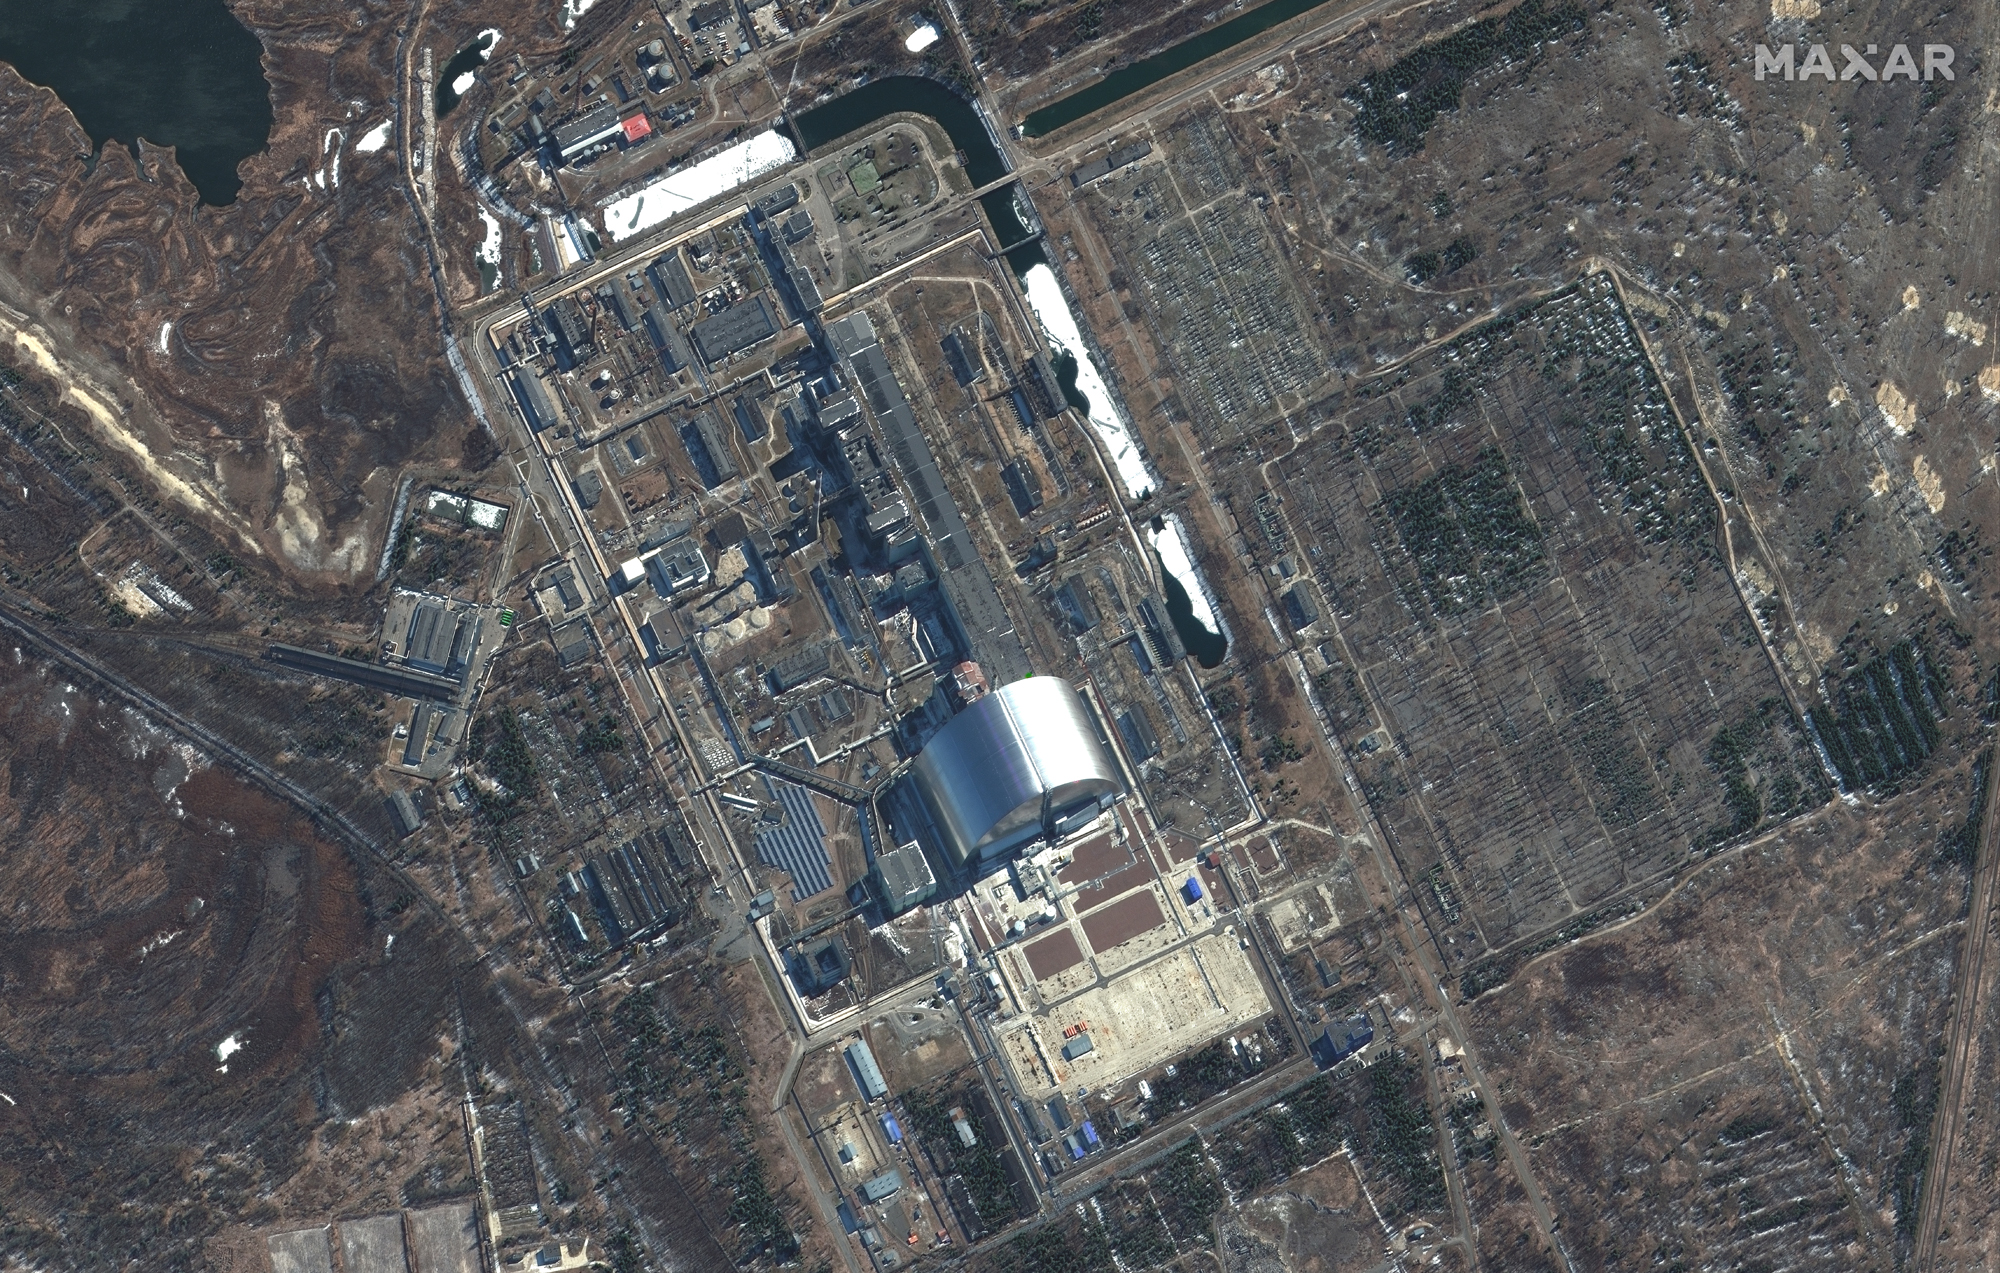 An overview of the sarcophagus covering the Chernobyl nuclear power plant in Ukraine and its surrounding area as seen by Maxar satellites on March 10, 2022.